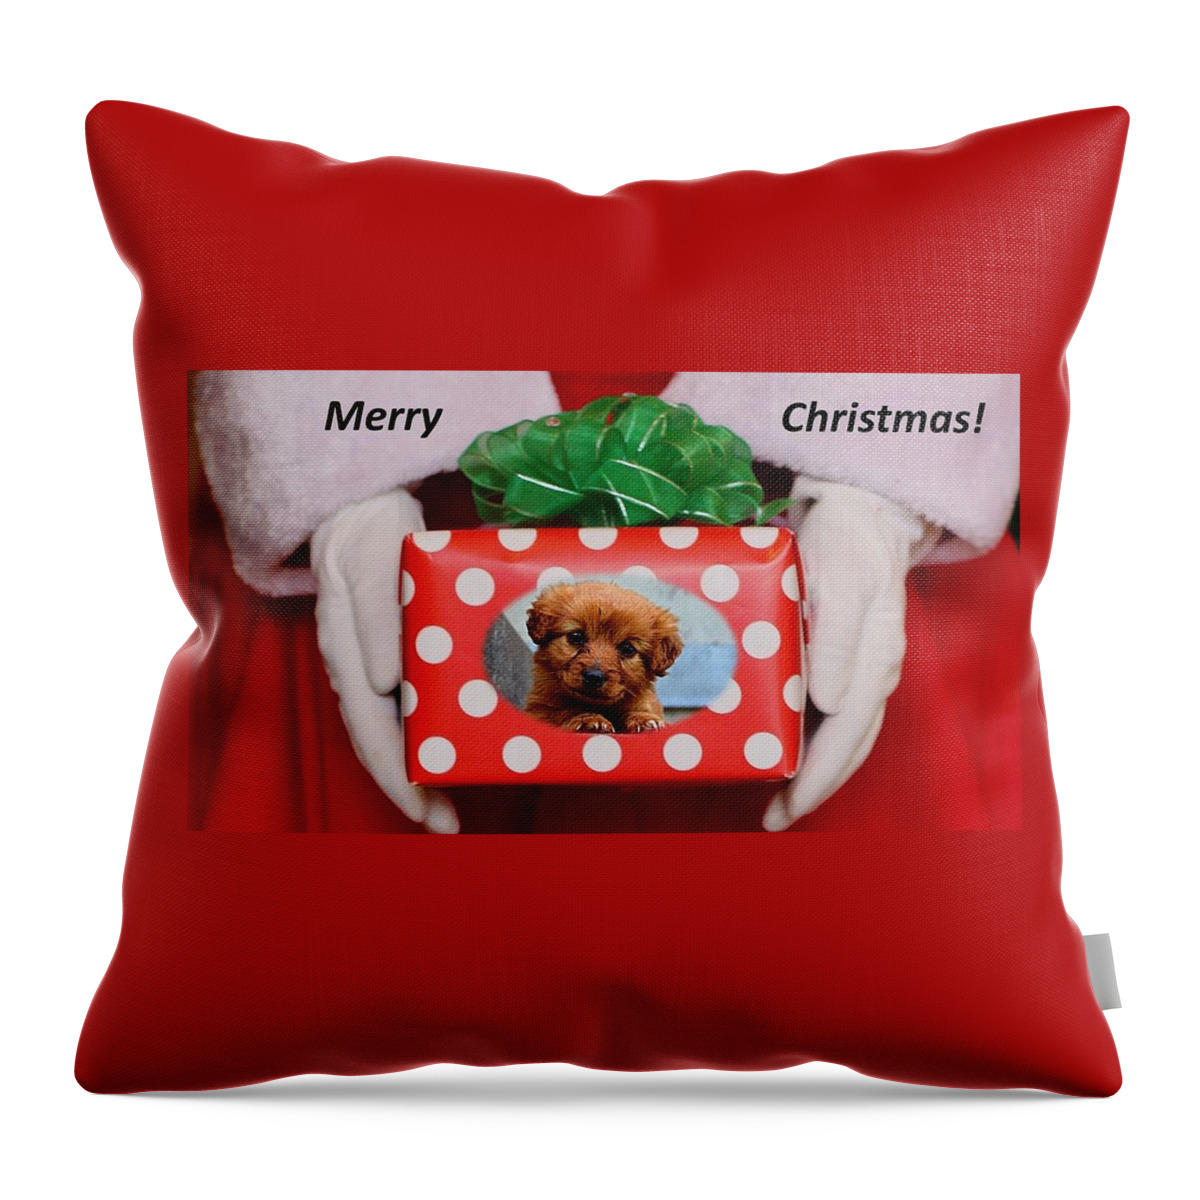 Christmas Throw Pillow featuring the photograph Santa Brings A Puppy by Nancy Ayanna Wyatt